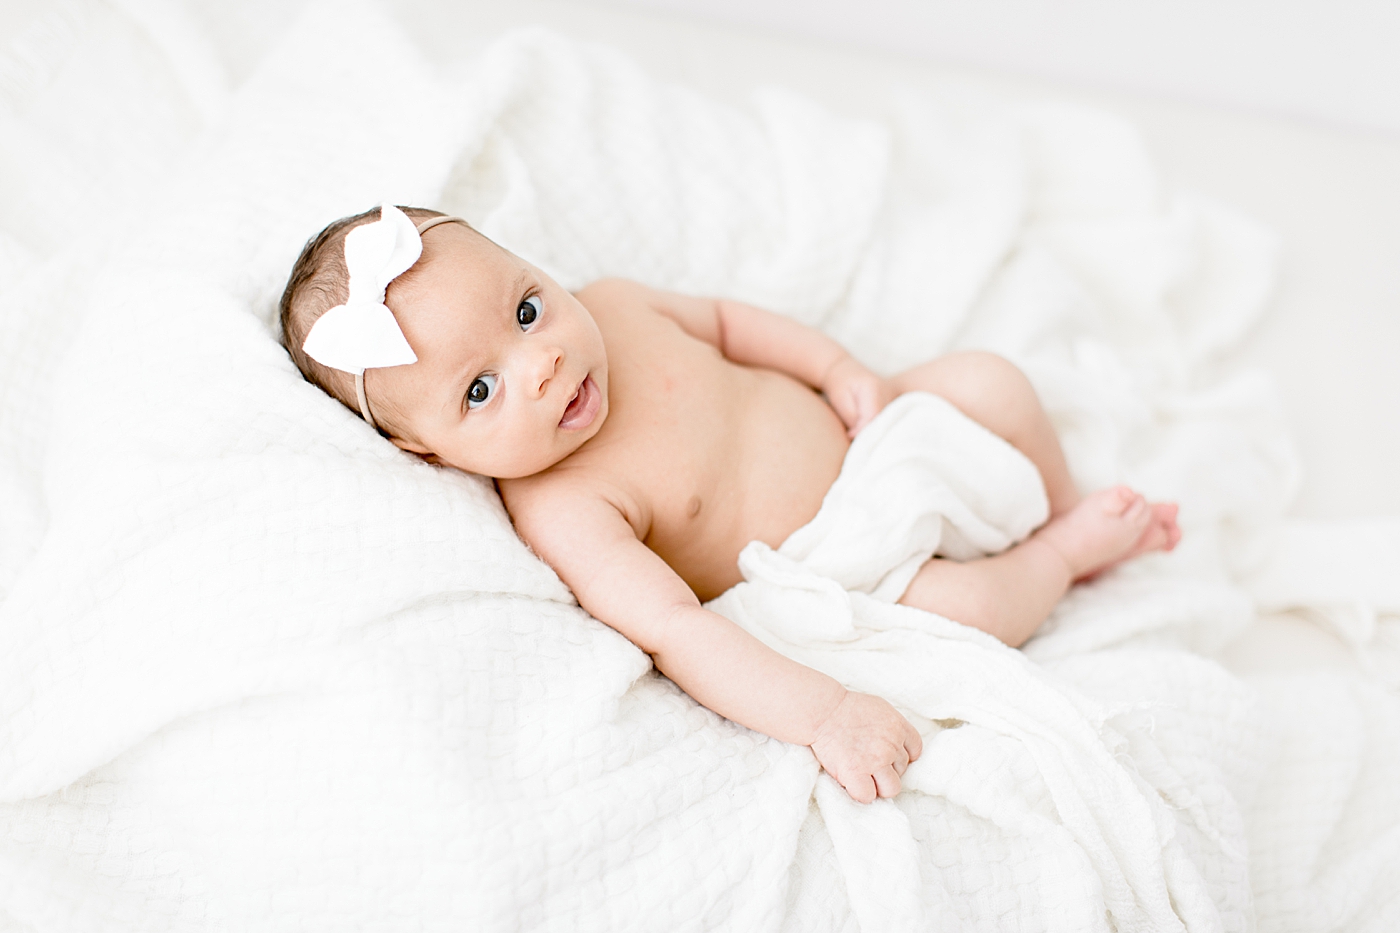 Studio newborn session with baby girl in Tampa, FL. Photo by Brittany Elise Photography.